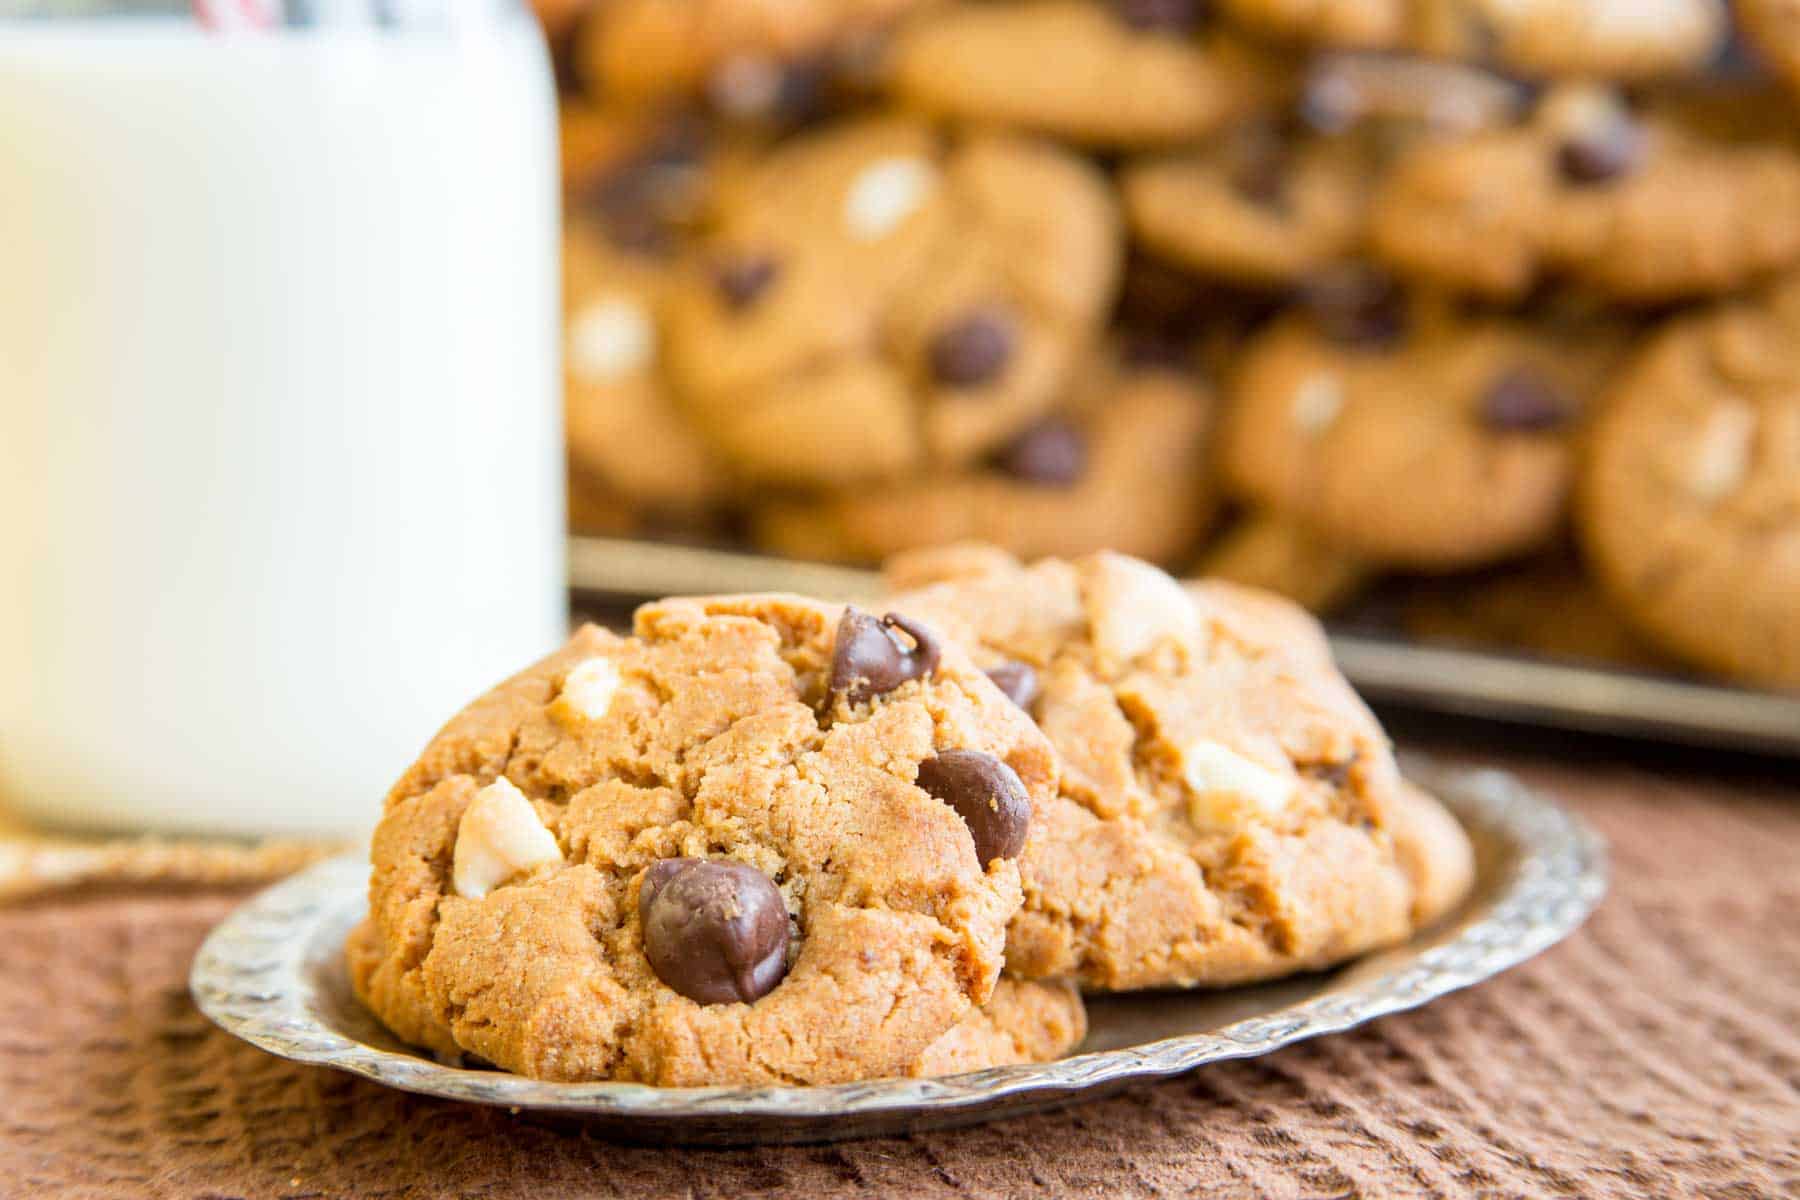 Three tripple chocolate chip peanut butter cookies on a small silver dish with a glass bottle of milk and more cookies piled in the background.